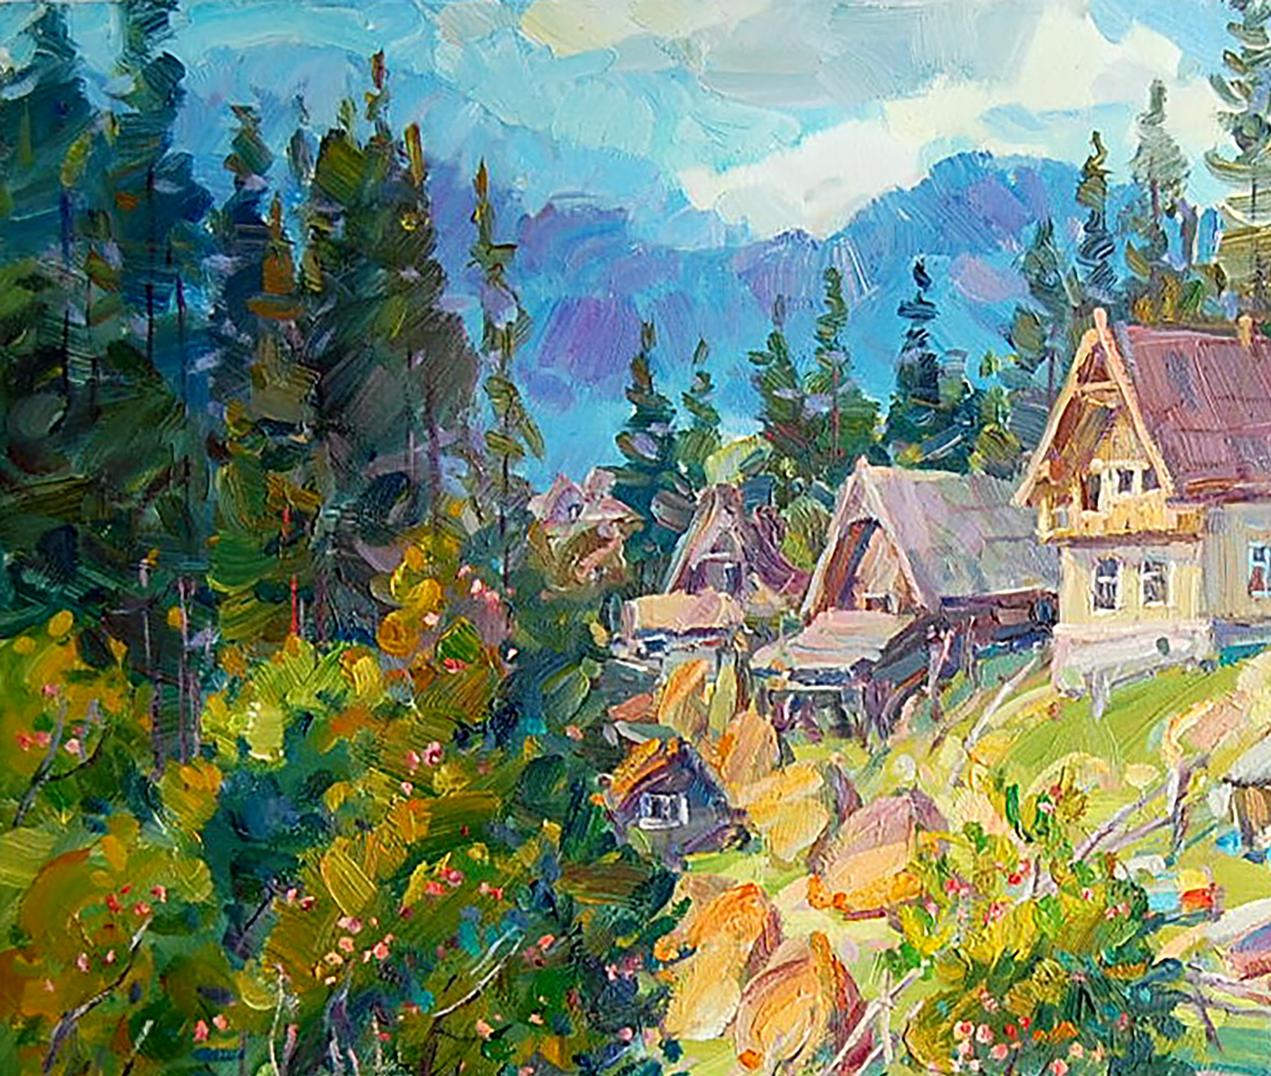 Dmitry Artim's oil painting capturing an etude in the Carpathian Mountains